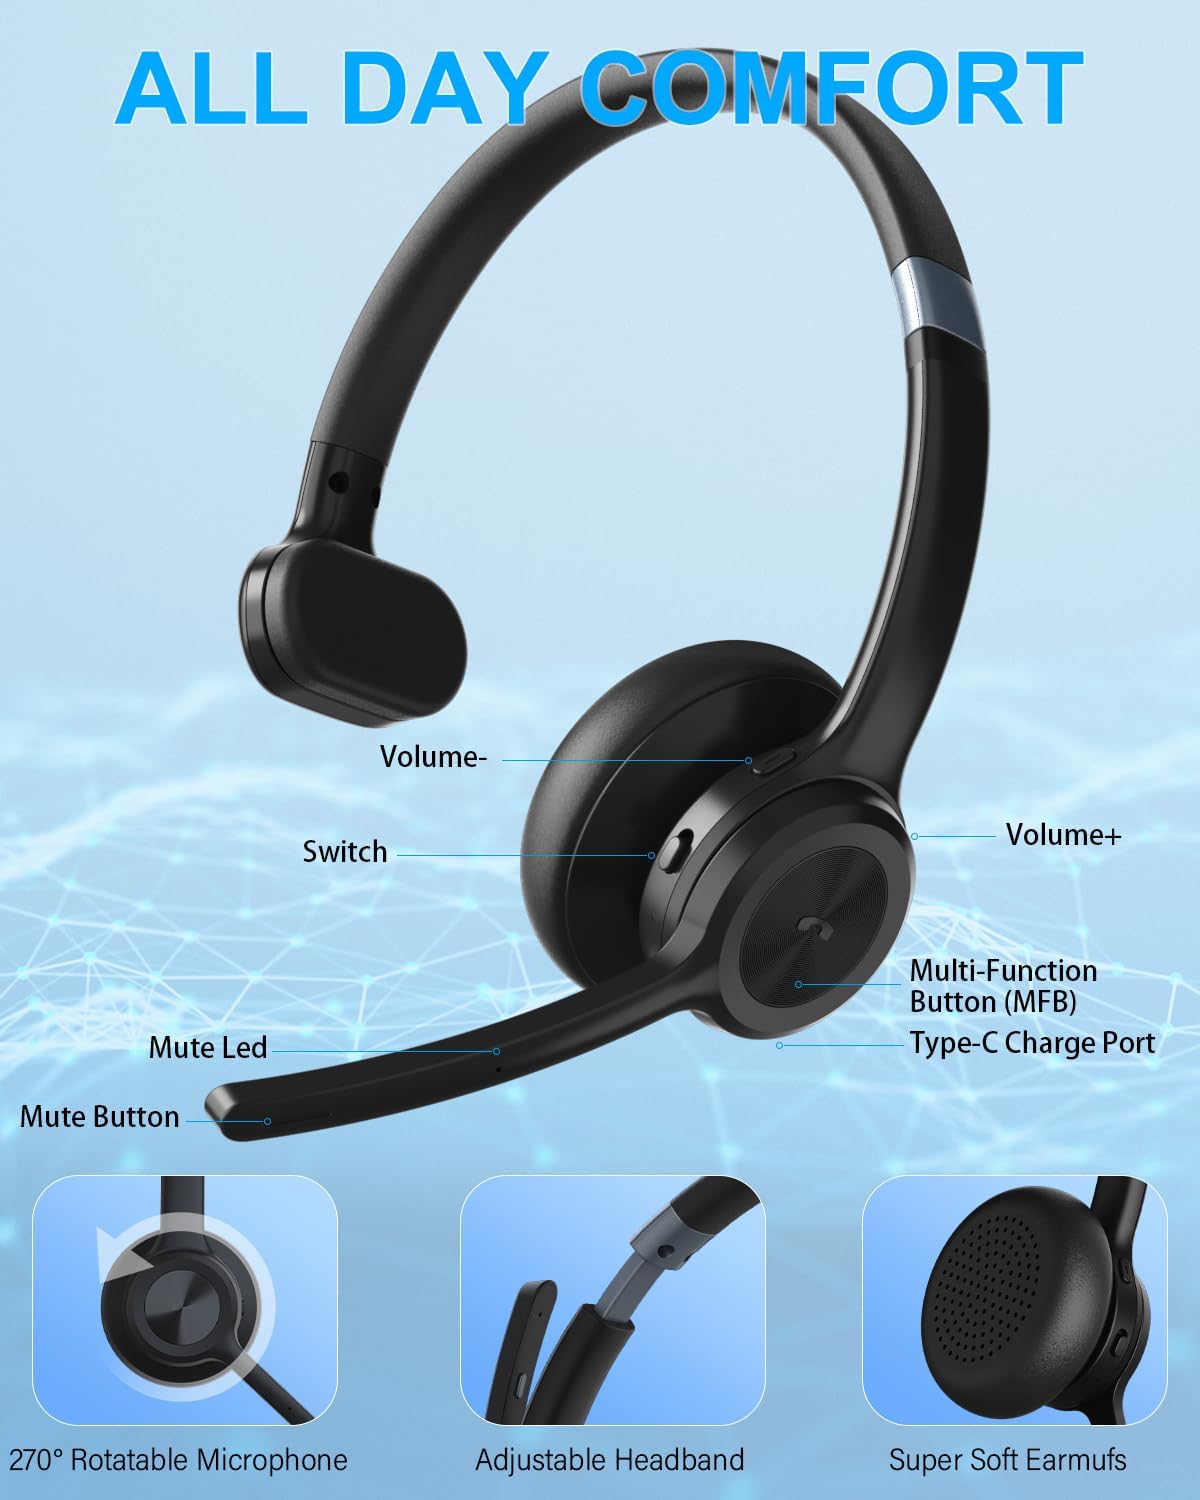 【𝟐𝟎𝟐4 𝐔𝐩𝐠𝐫𝐚𝐝𝐞𝐝】 Trucker Bluetooth Headset, Wireless Headset with Microphone ENC Noise Cancelling & Mute Button, 30H Talk Time, Bluetooth 5.2 Headphones for Work, Office, Call Center